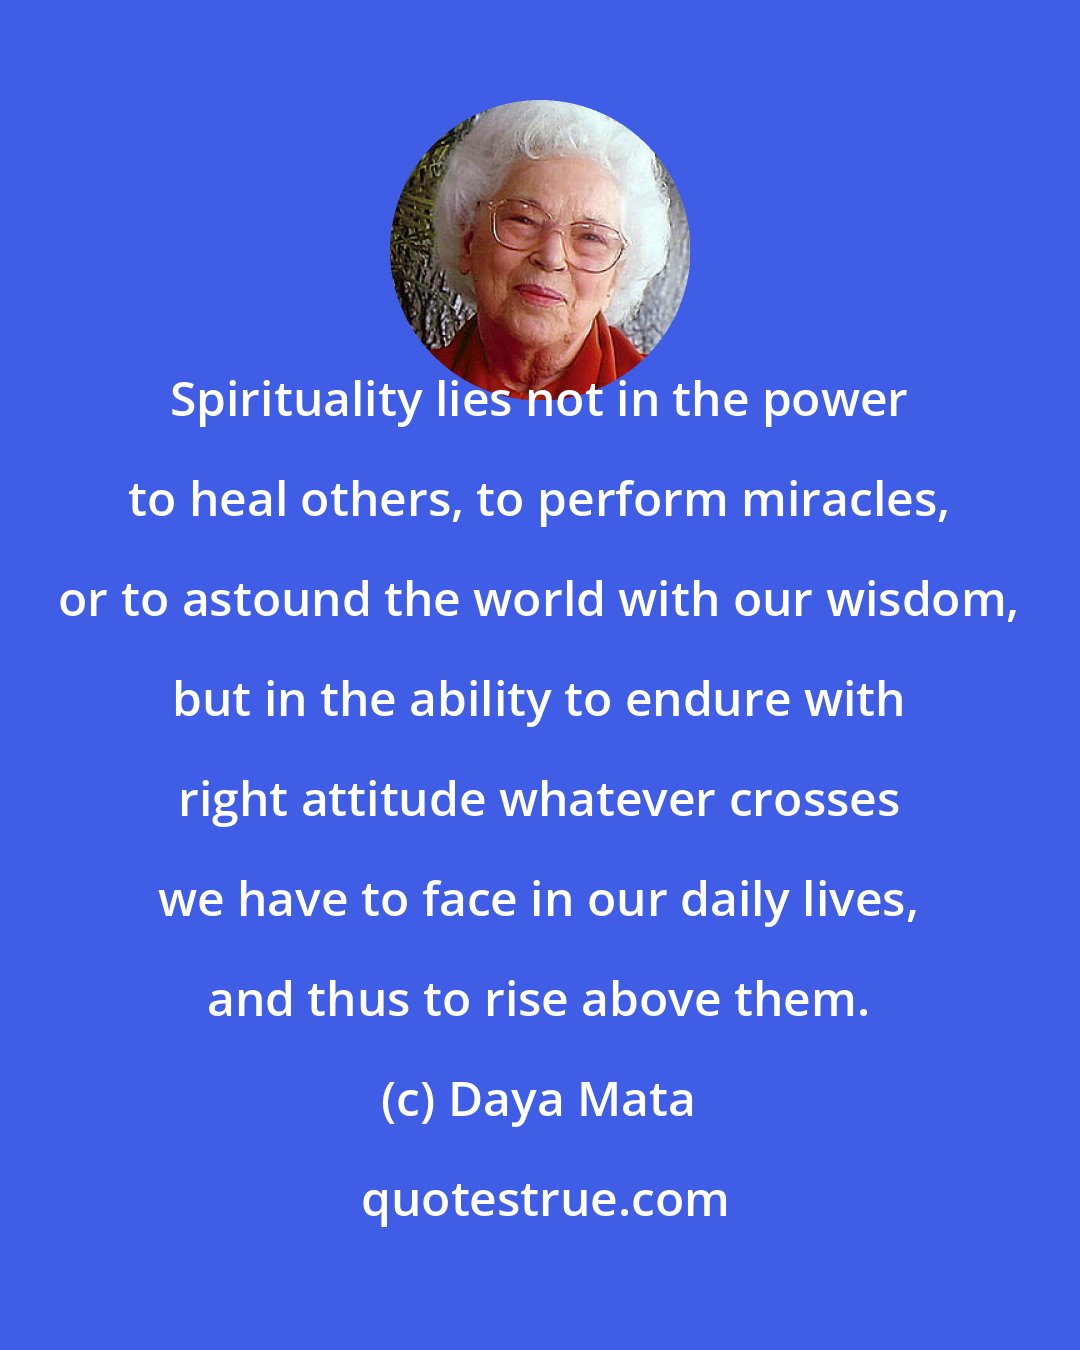 Daya Mata: Spirituality lies not in the power to heal others, to perform miracles, or to astound the world with our wisdom, but in the ability to endure with right attitude whatever crosses we have to face in our daily lives, and thus to rise above them.